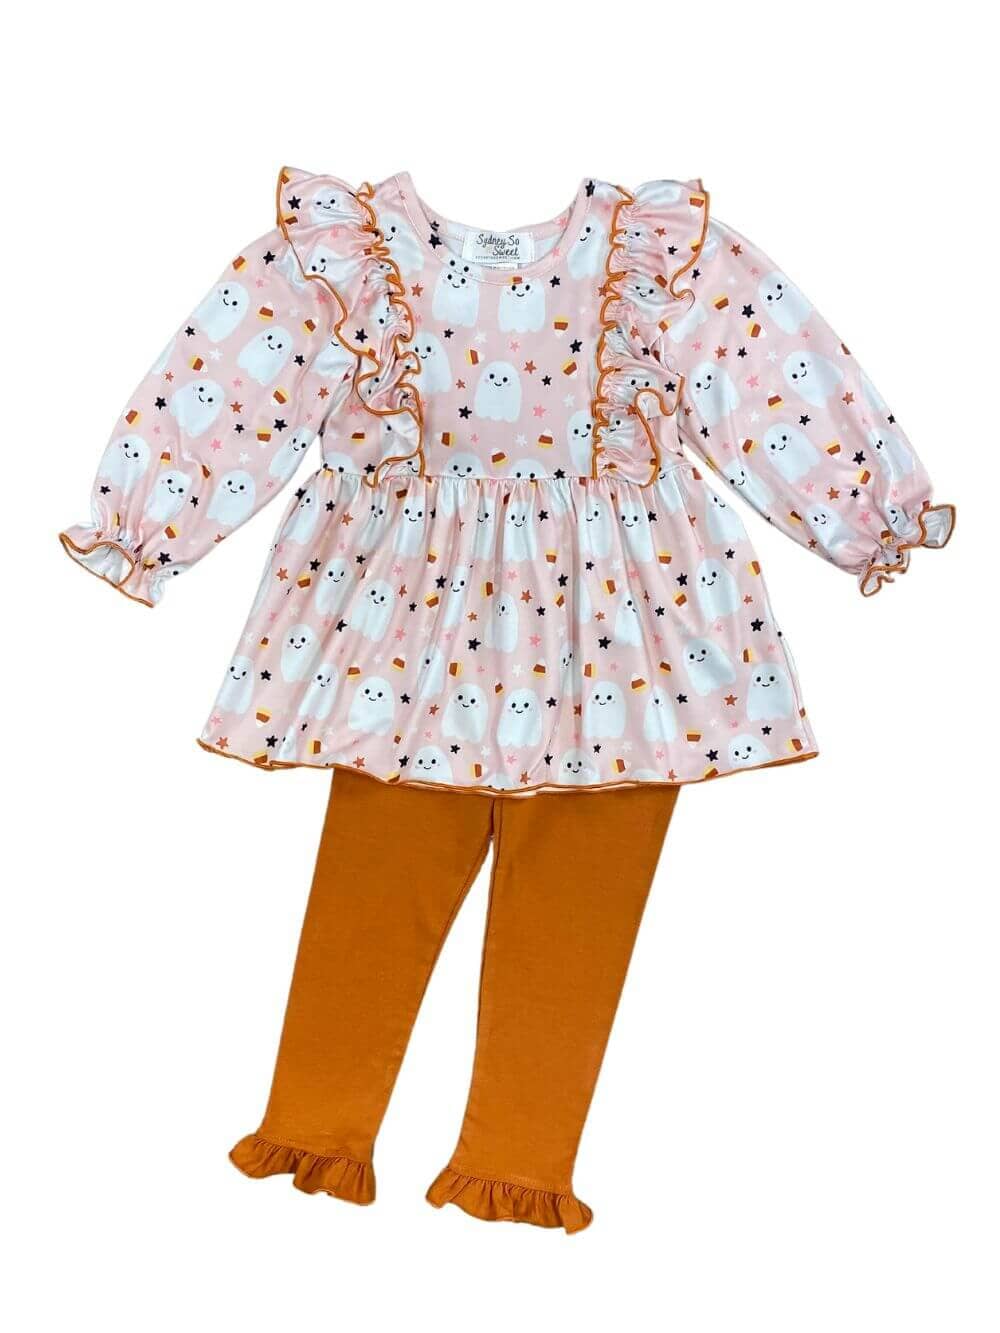 Cute Baby Girl Plush Hoodie And Leggings Set Long Sleeve Two Piece For  Fall/Winter 231020 From Pang07, $10.58 | DHgate.Com